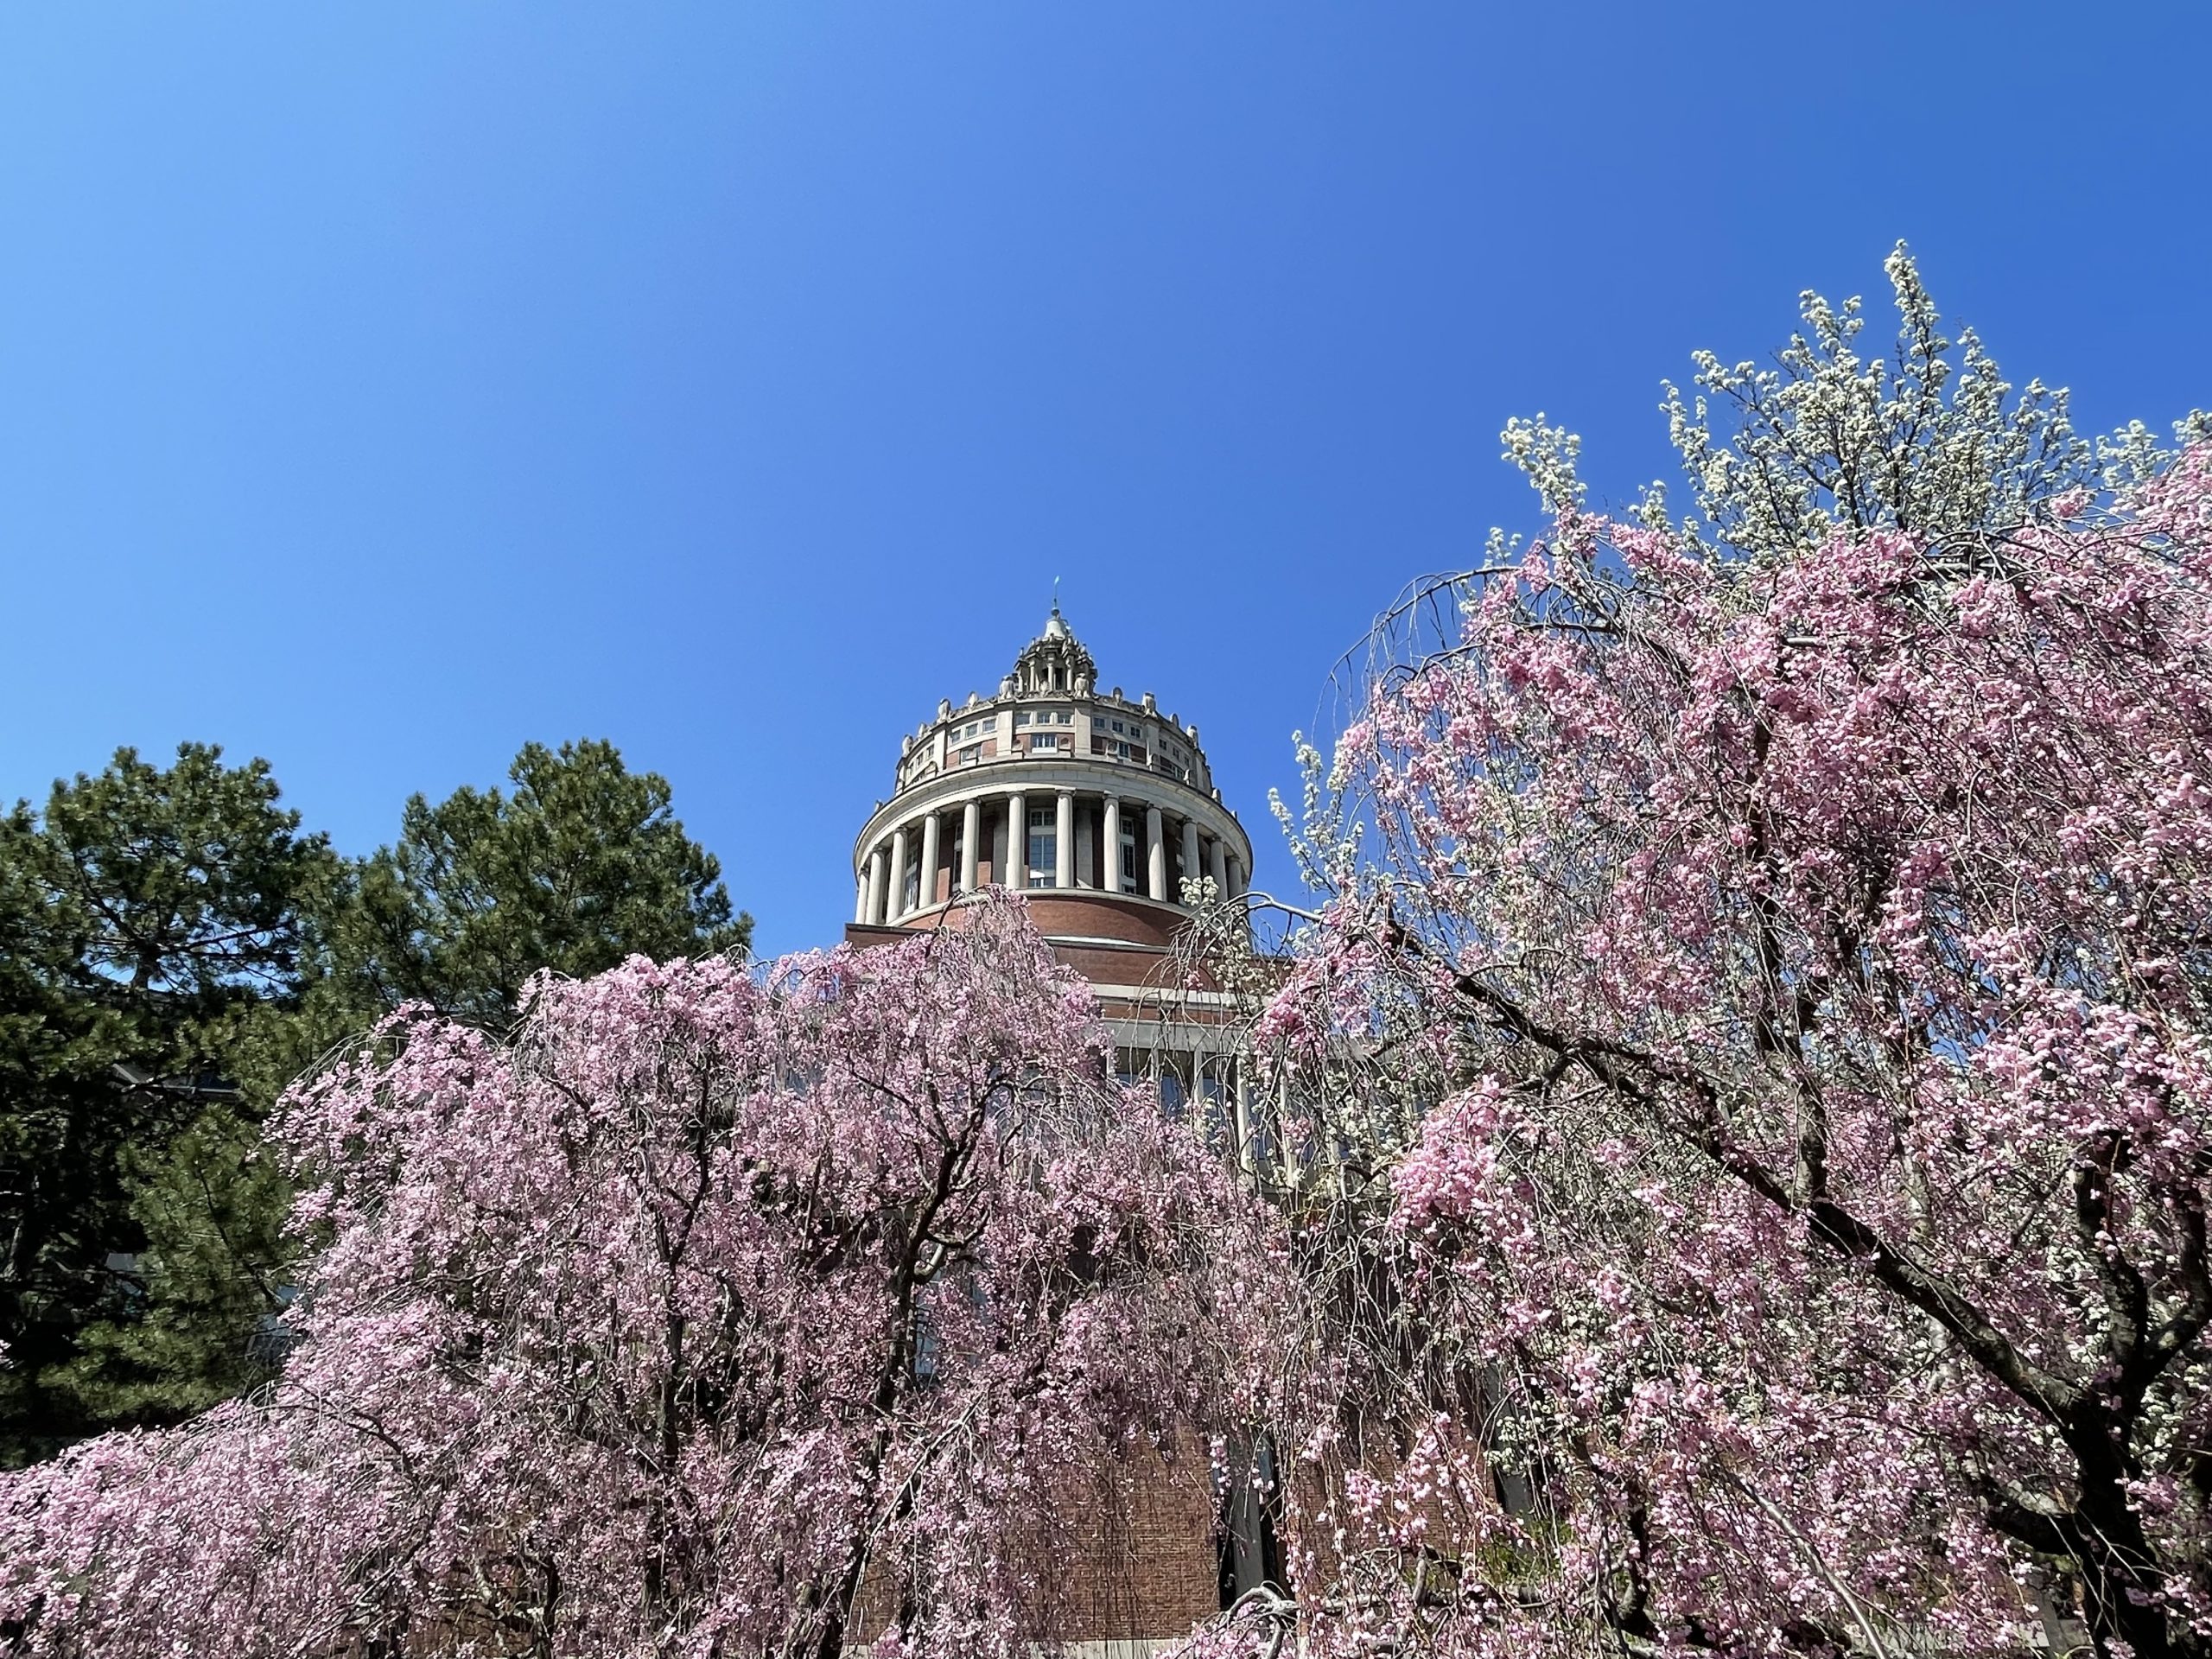 Rush Rhees tower framed by cherry blossoms